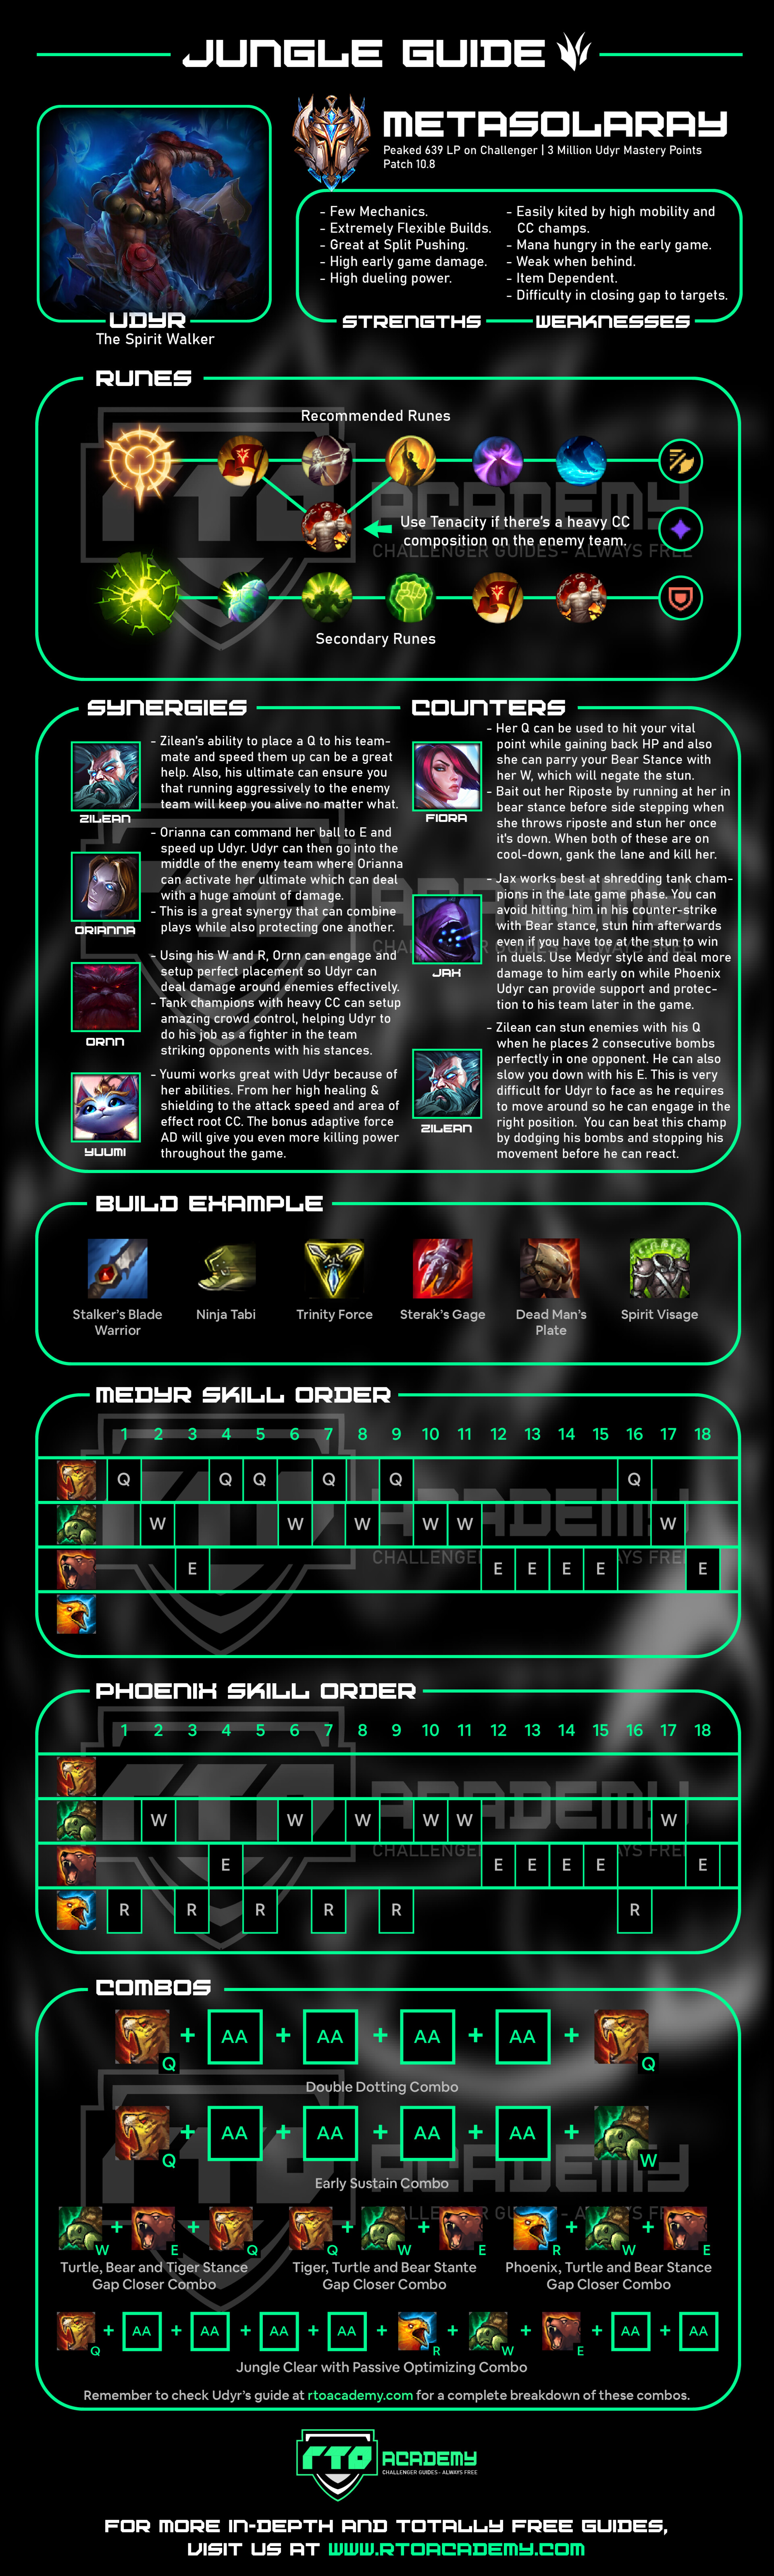 - Udyr Jungle Guide Infographic